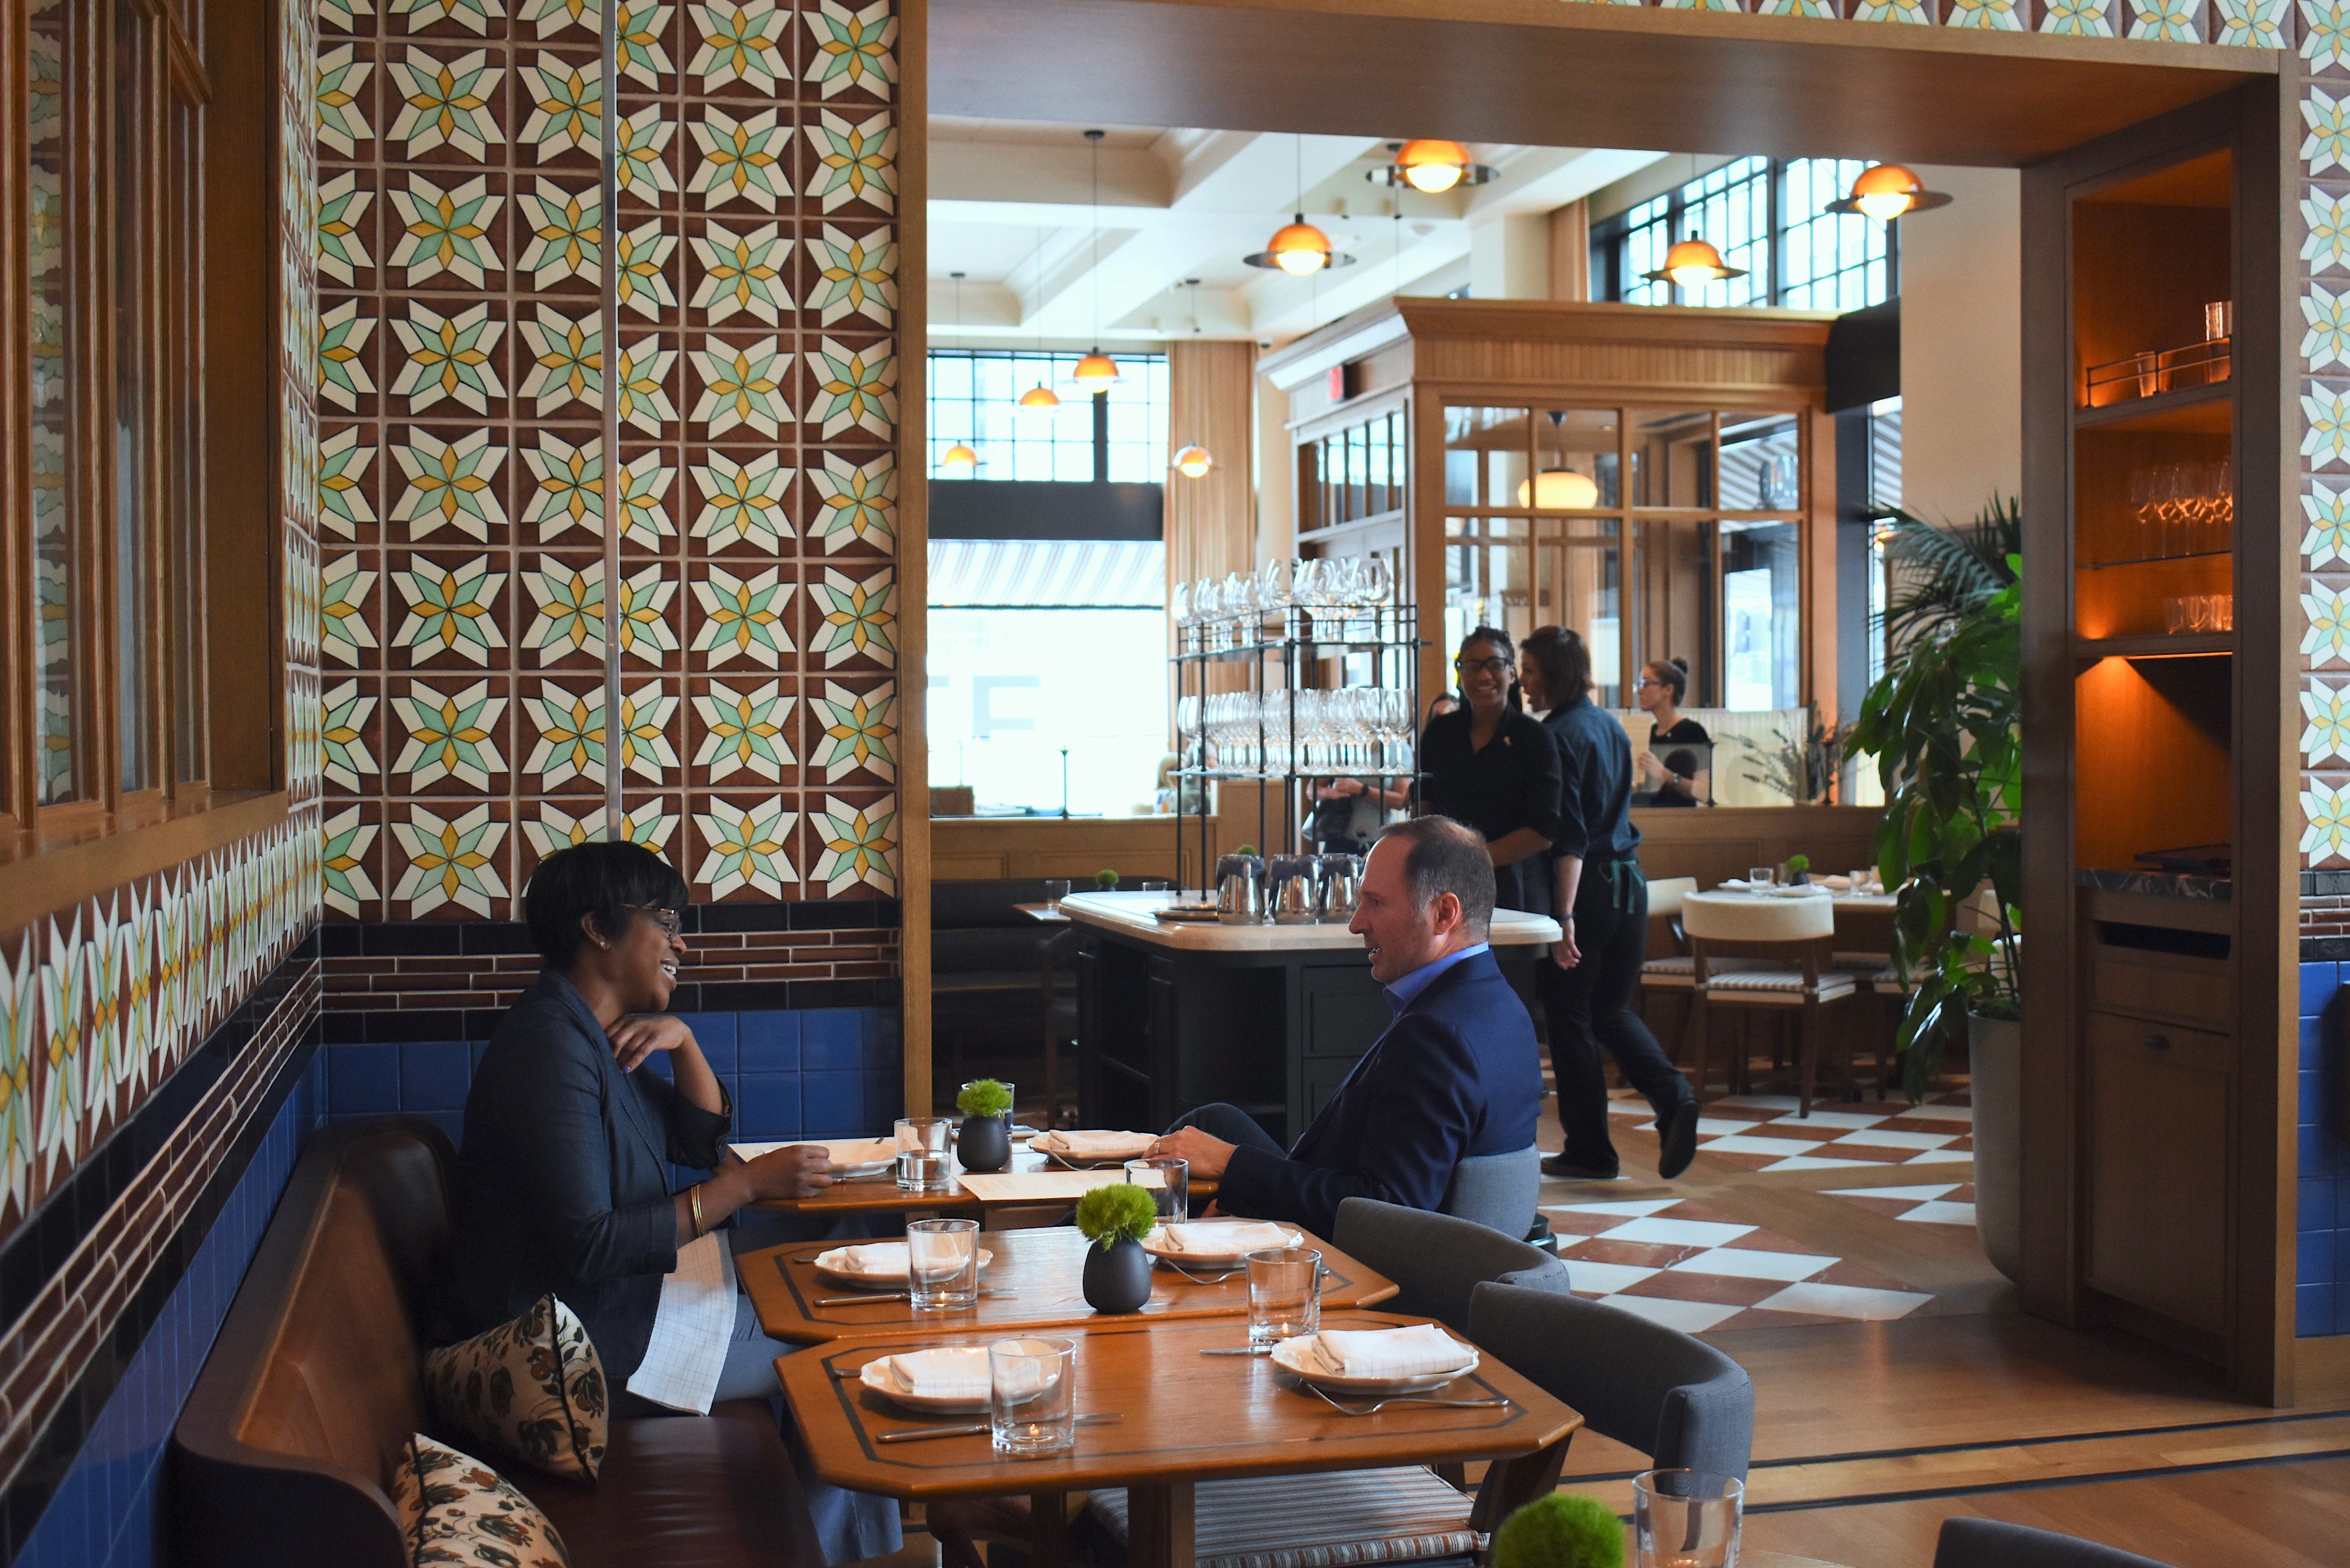 Jamila Thompson, left, of Detroit, shares a laughter-filled lunch with Troy Larson, of Birmingham, at the new Italian eatery San Morello, inside the Shinola Hotel in Detroit.